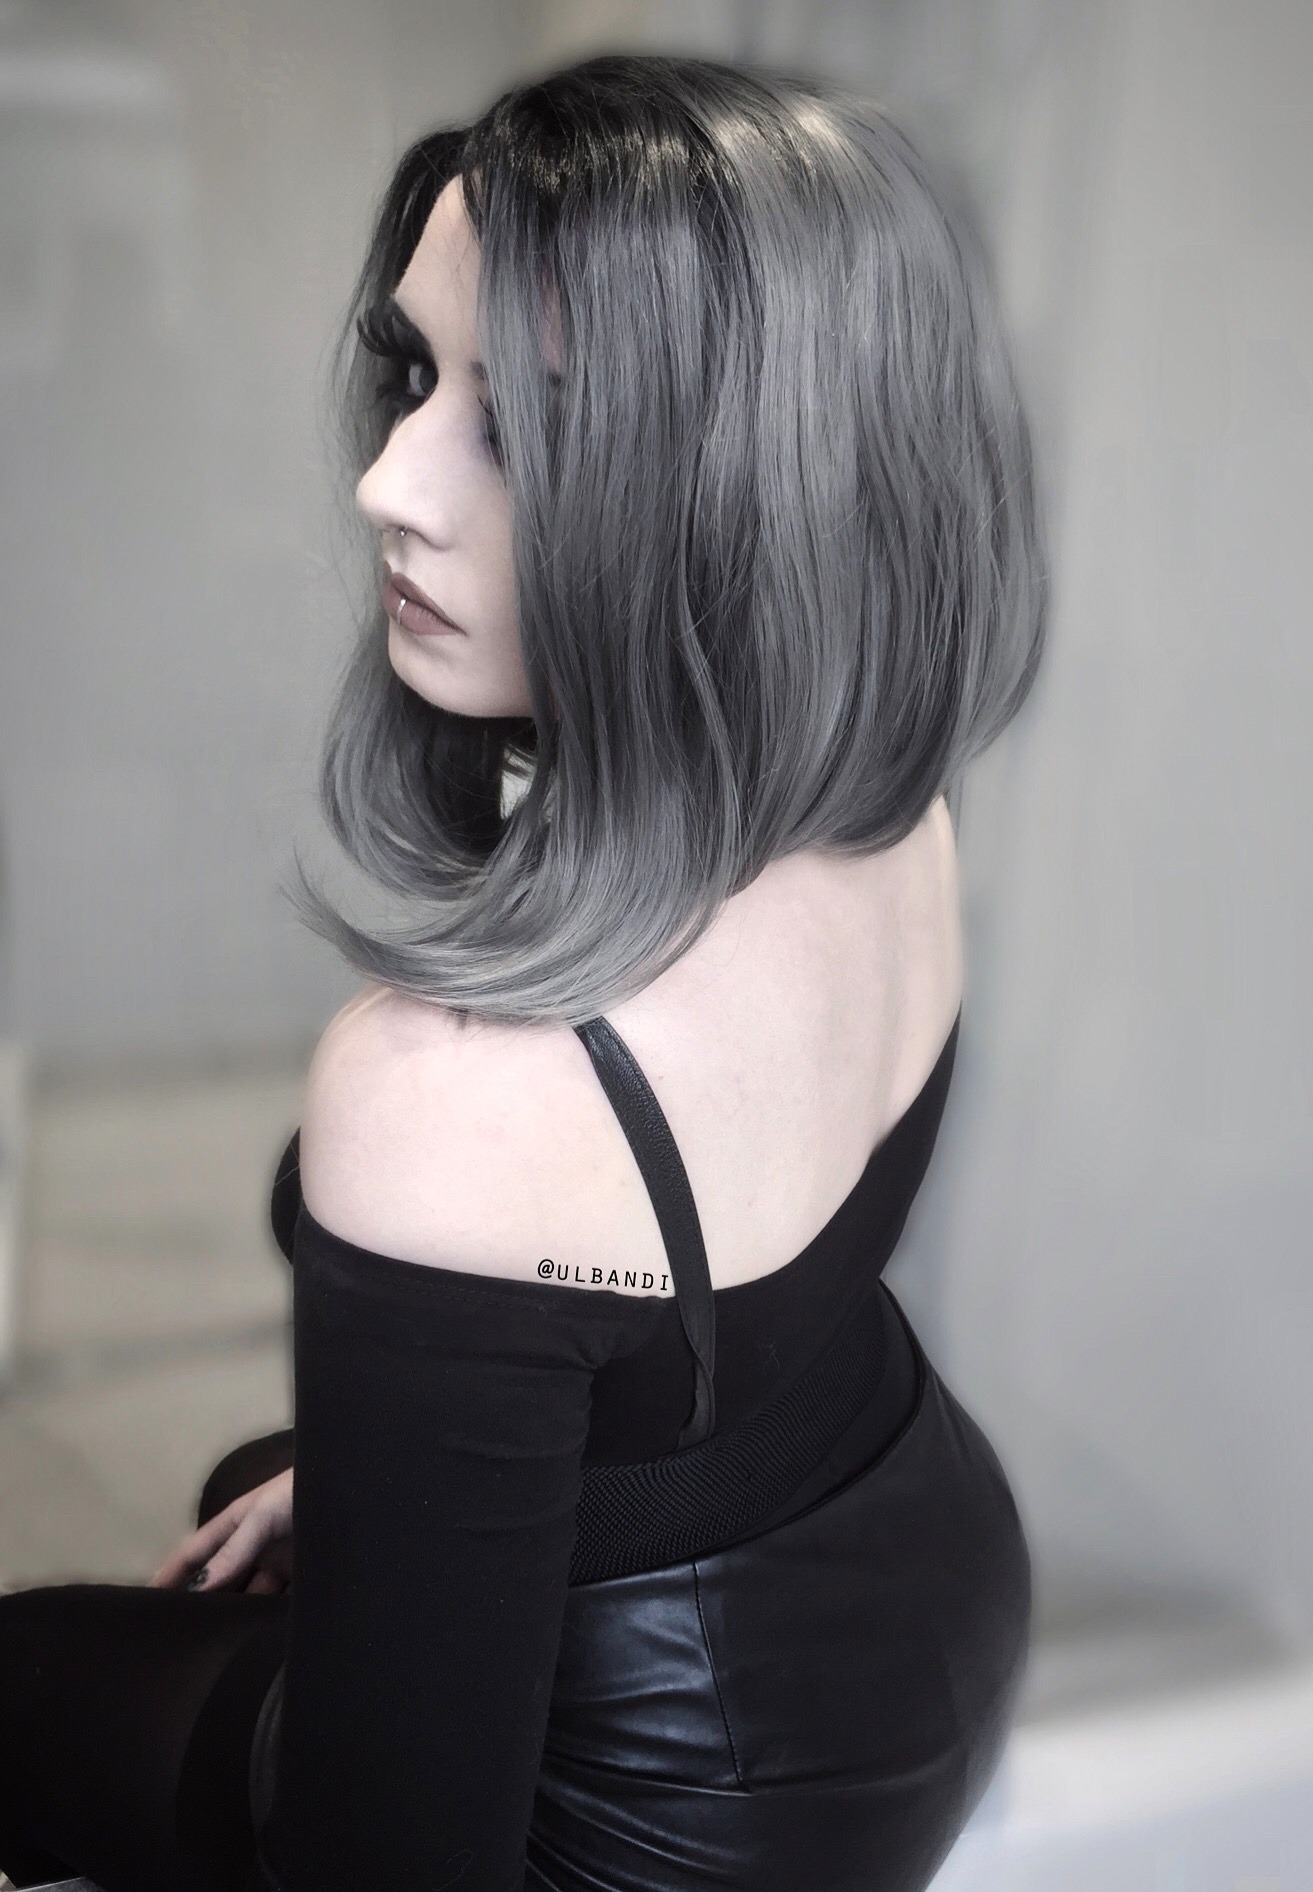 Grey bob lace front wig with dark roots | Spellbound by Lush Wigs UK